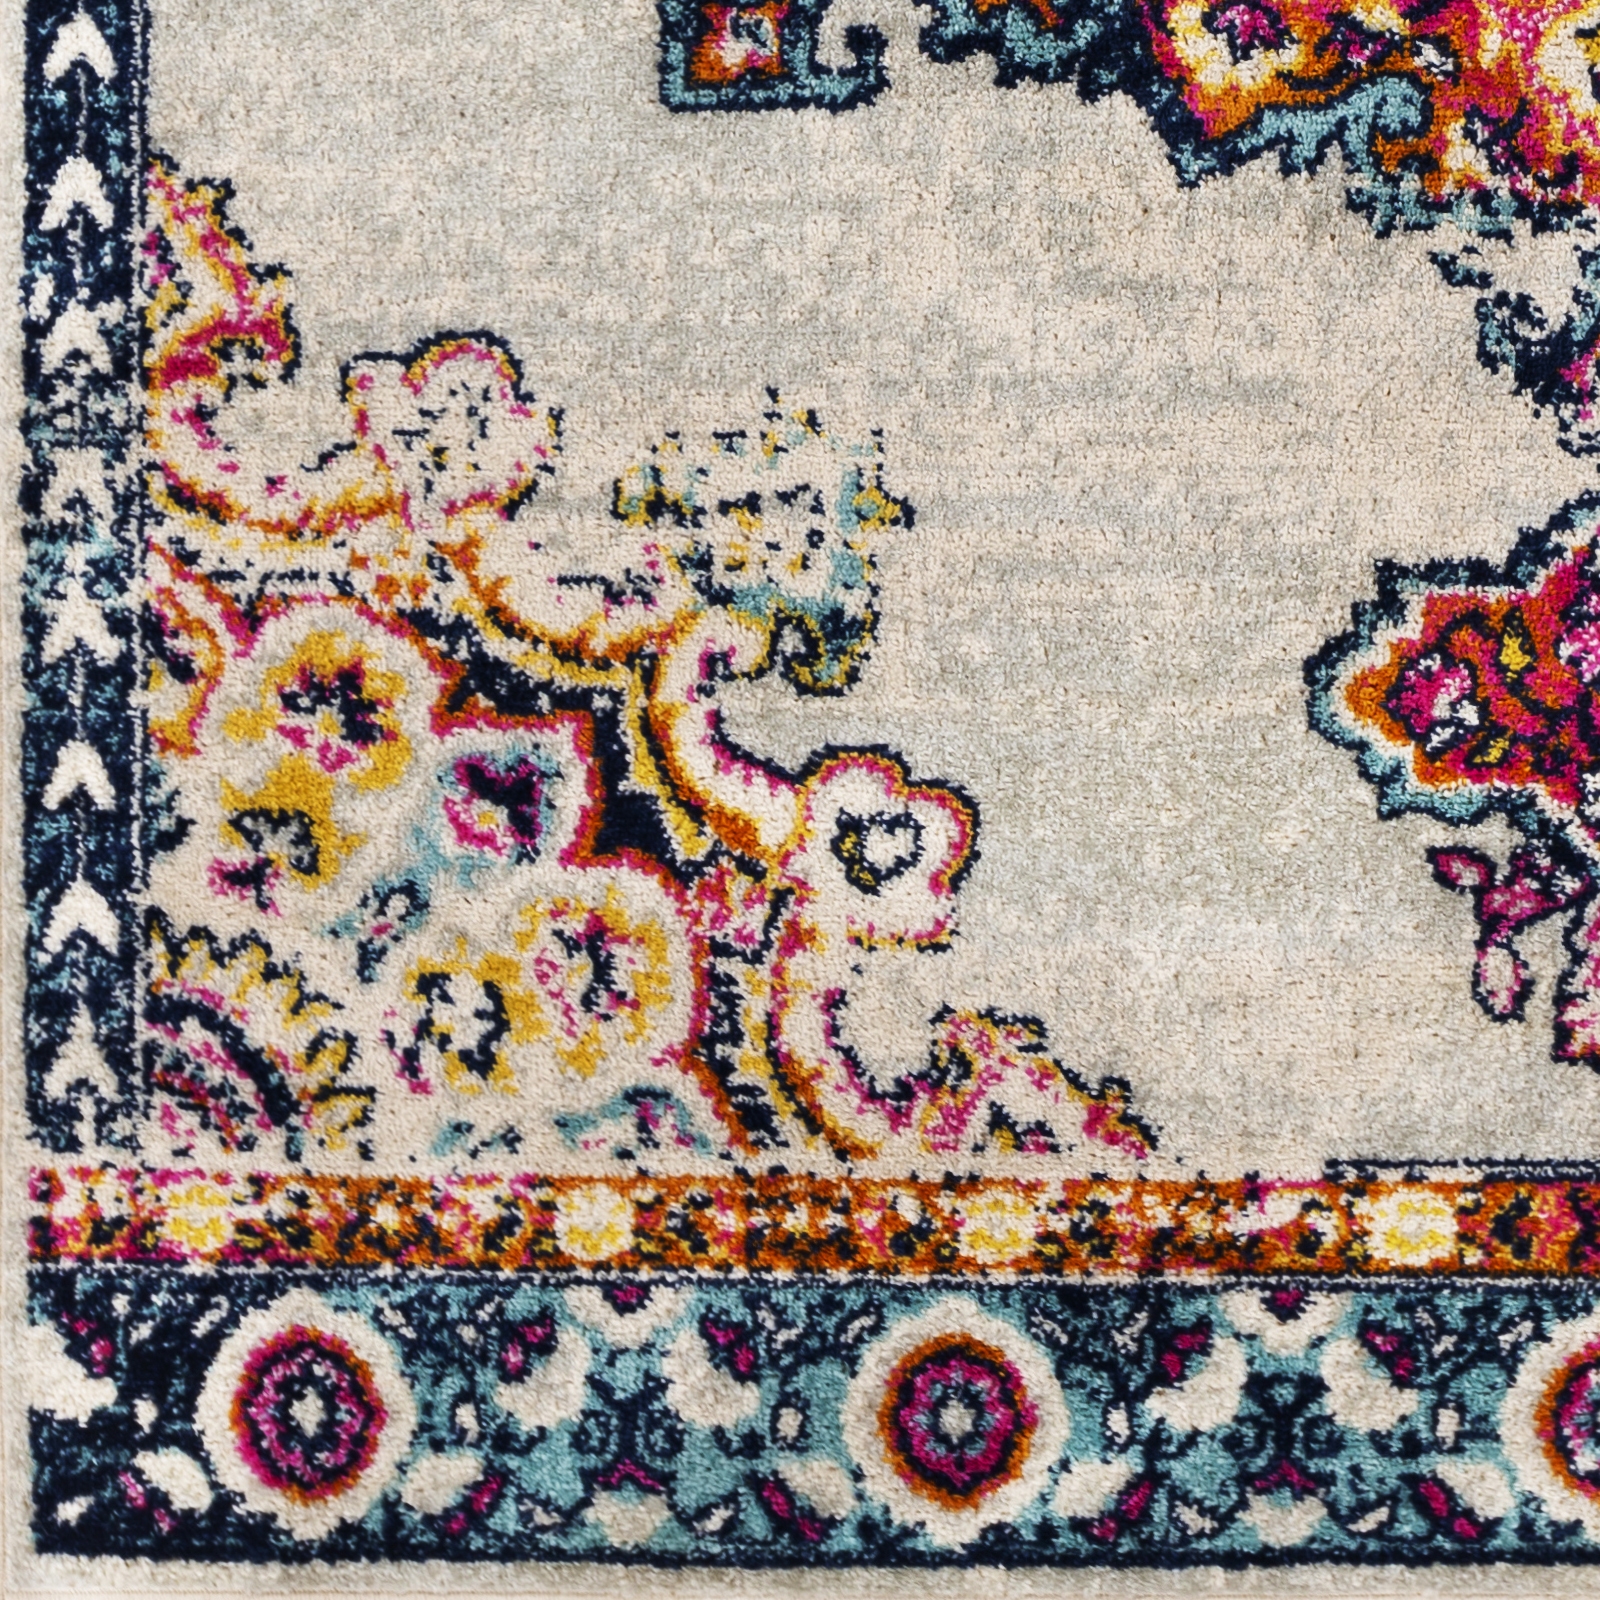 Chester Rug, 9' x 12' - Image 5